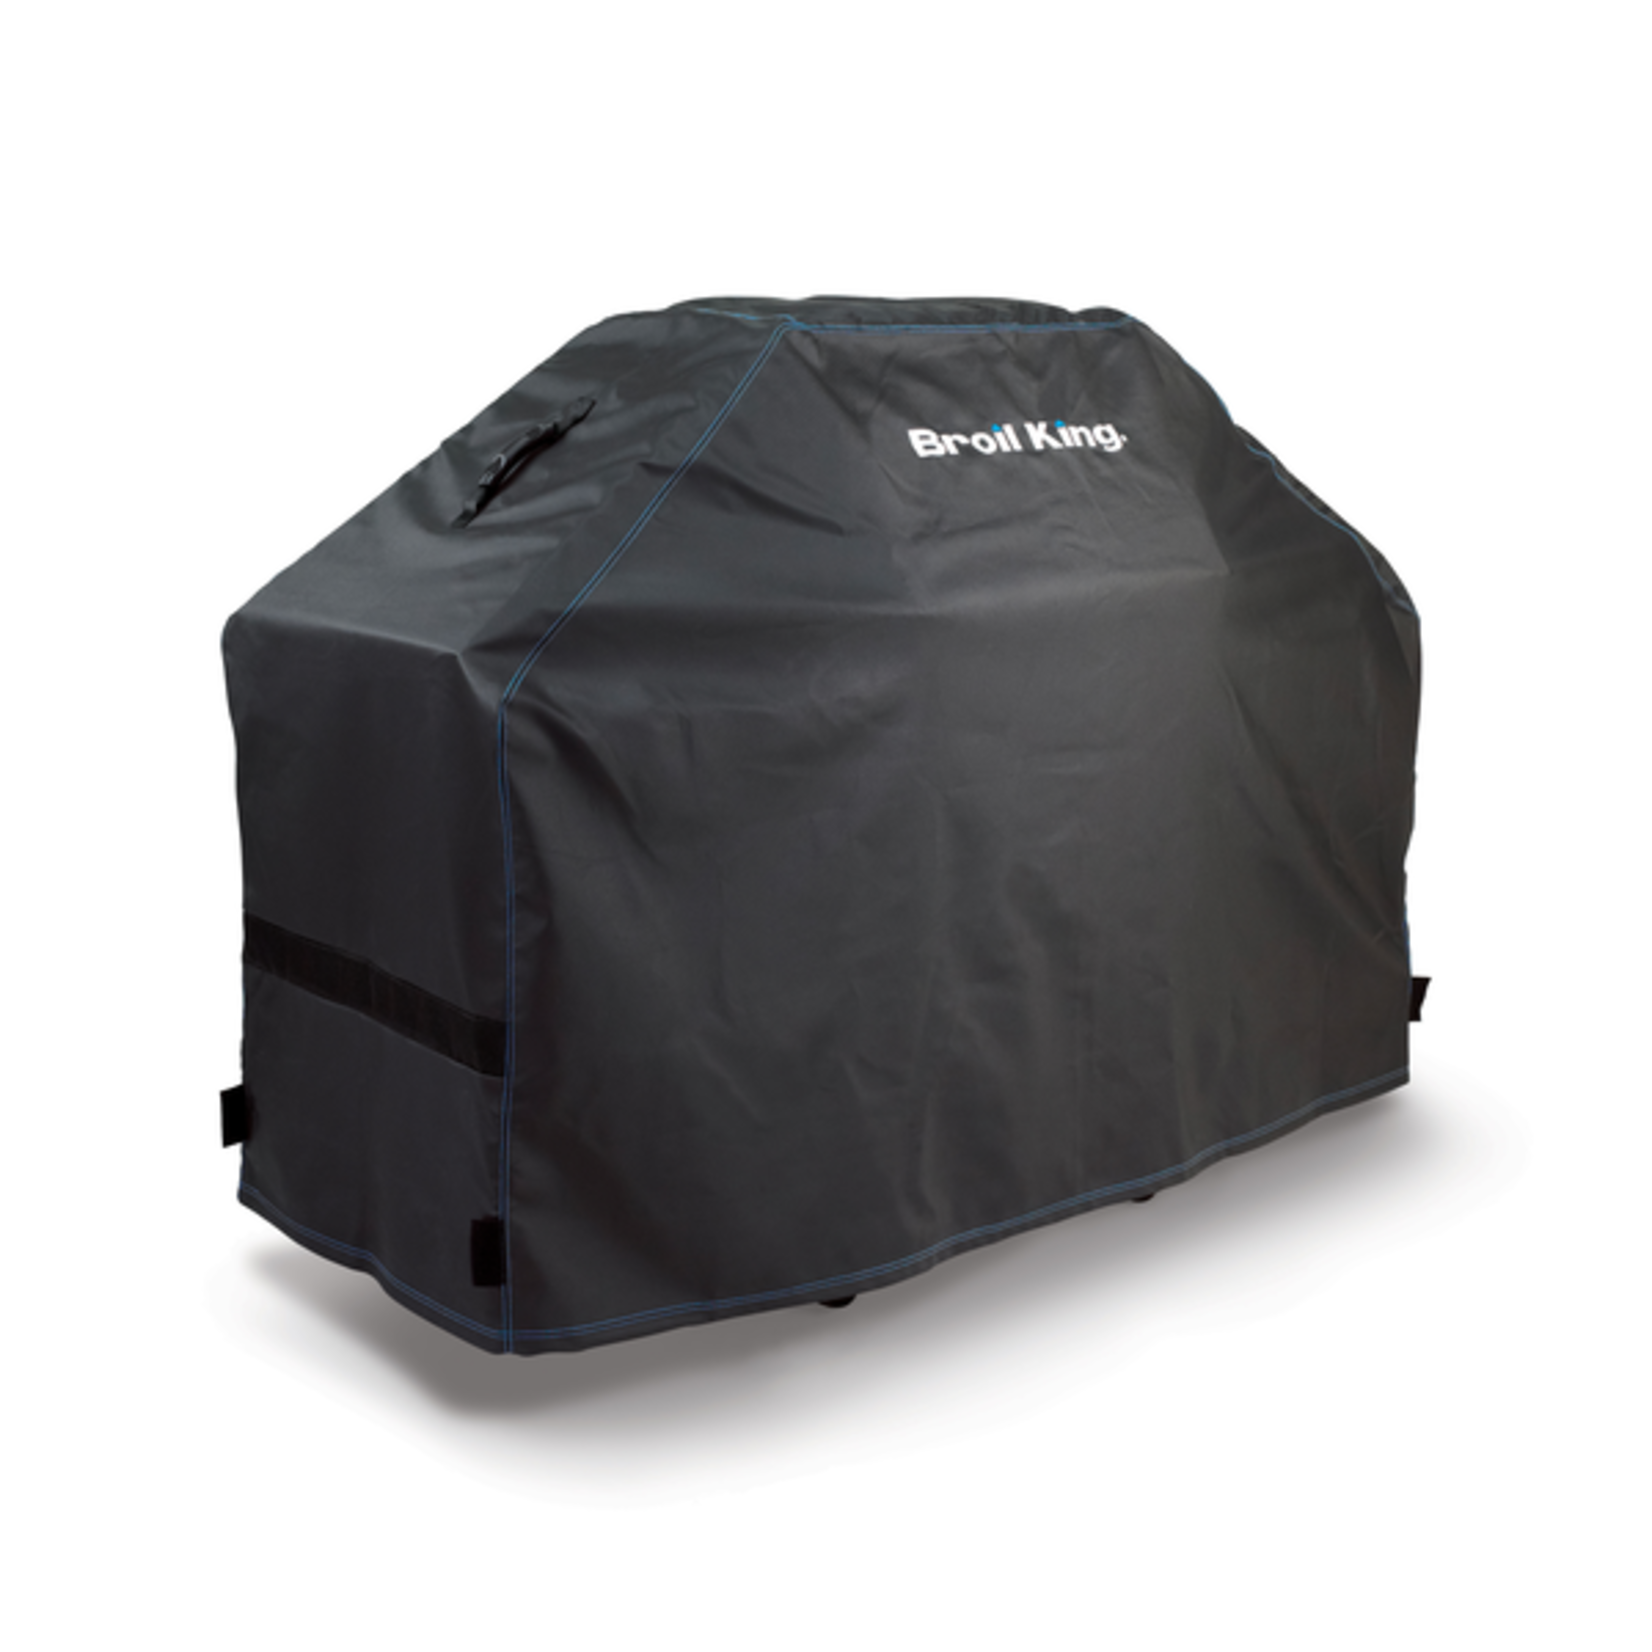 Broil King Grill Cover - Premium - Baron 500 Series